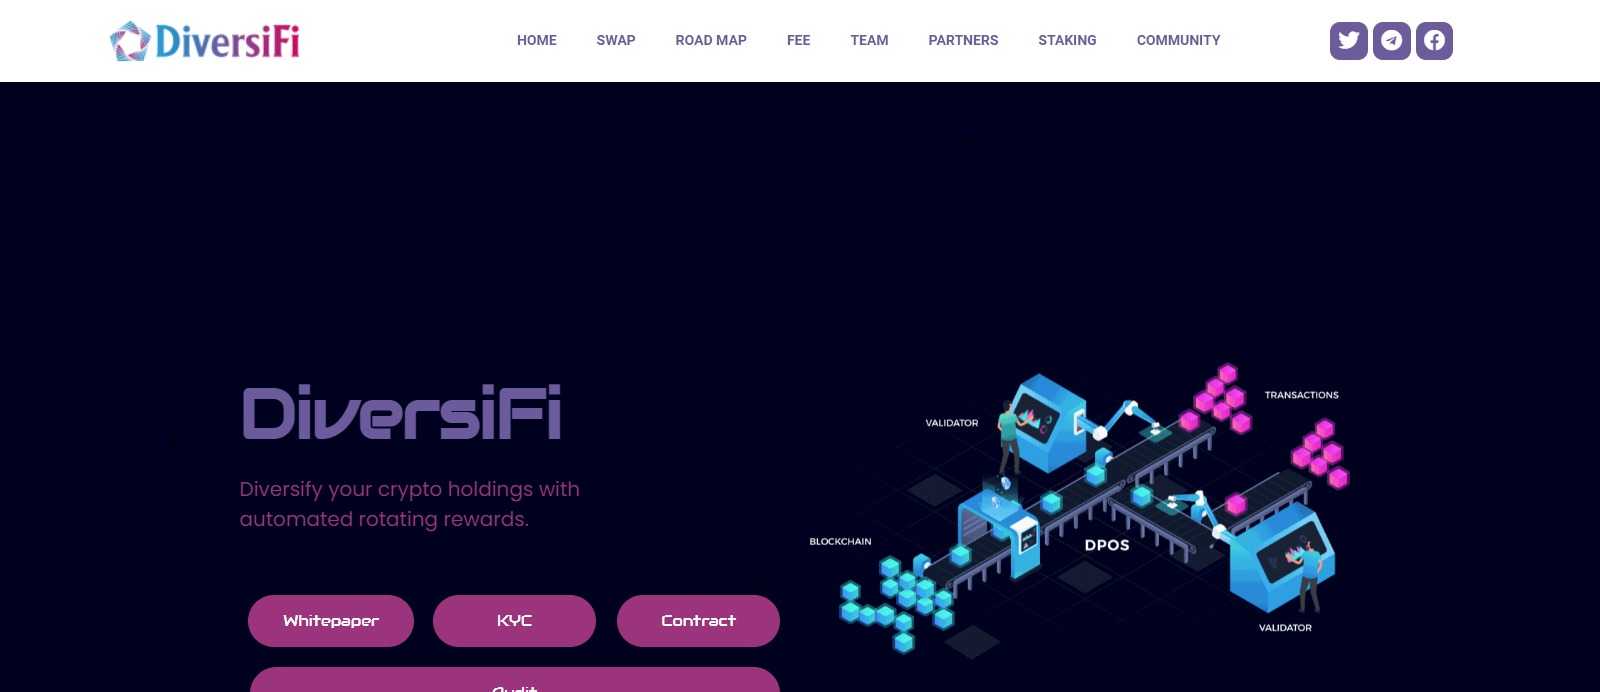 What Is DiversiFi Blue(DVFB)? Complete Guide & Review About DiversiFi Blue